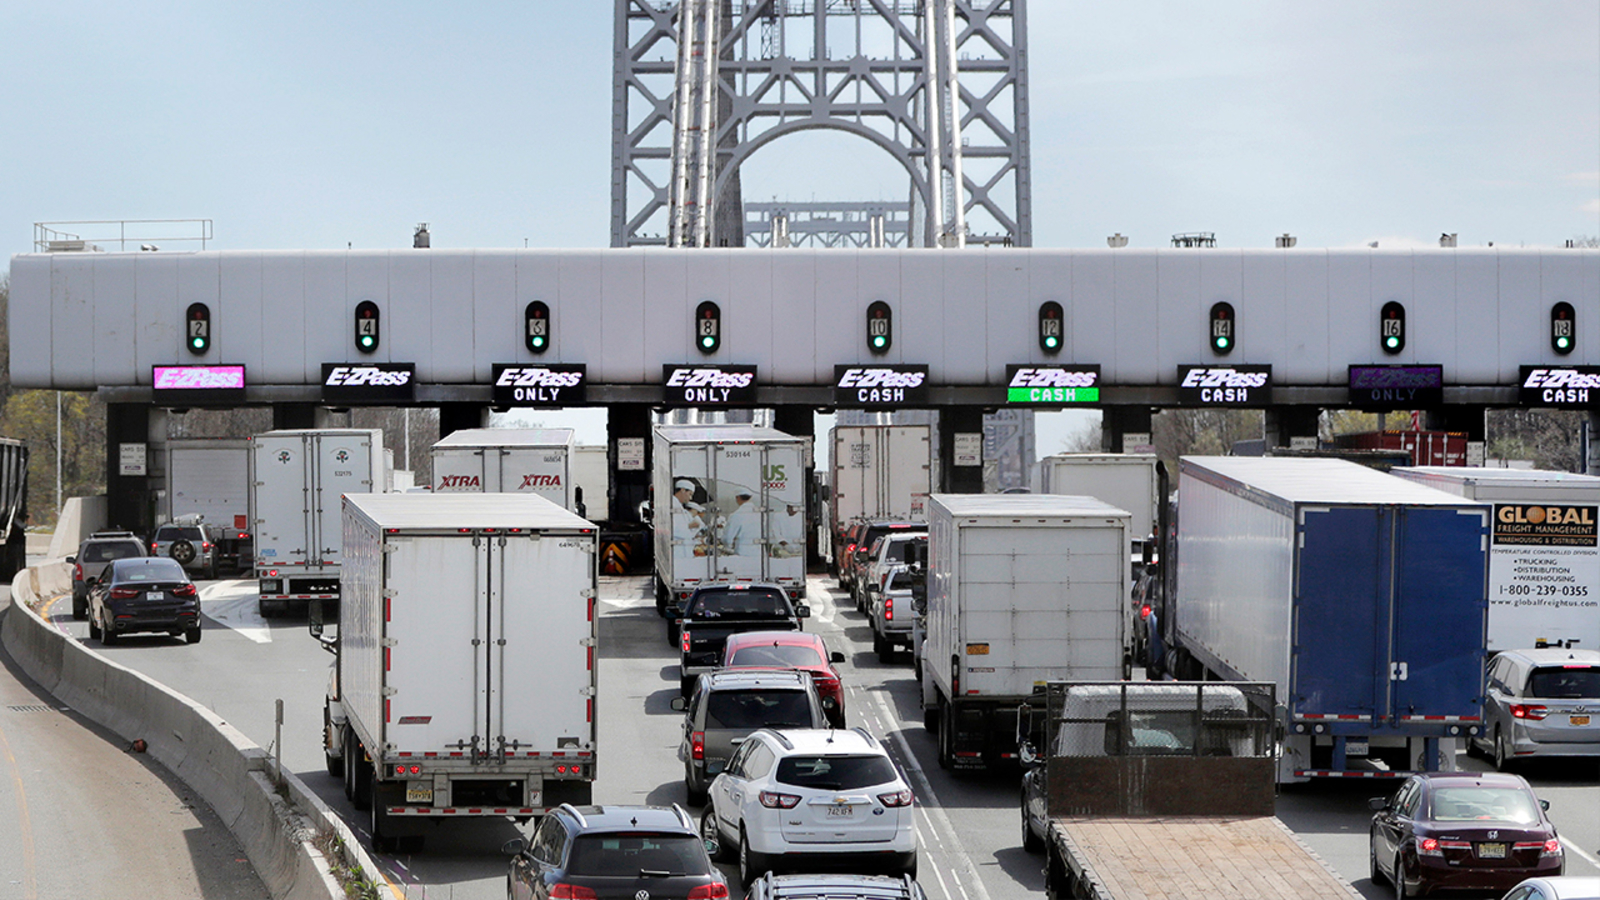 Tolls Between New York City And New Jersey Bridges And Tunnels Going Up!